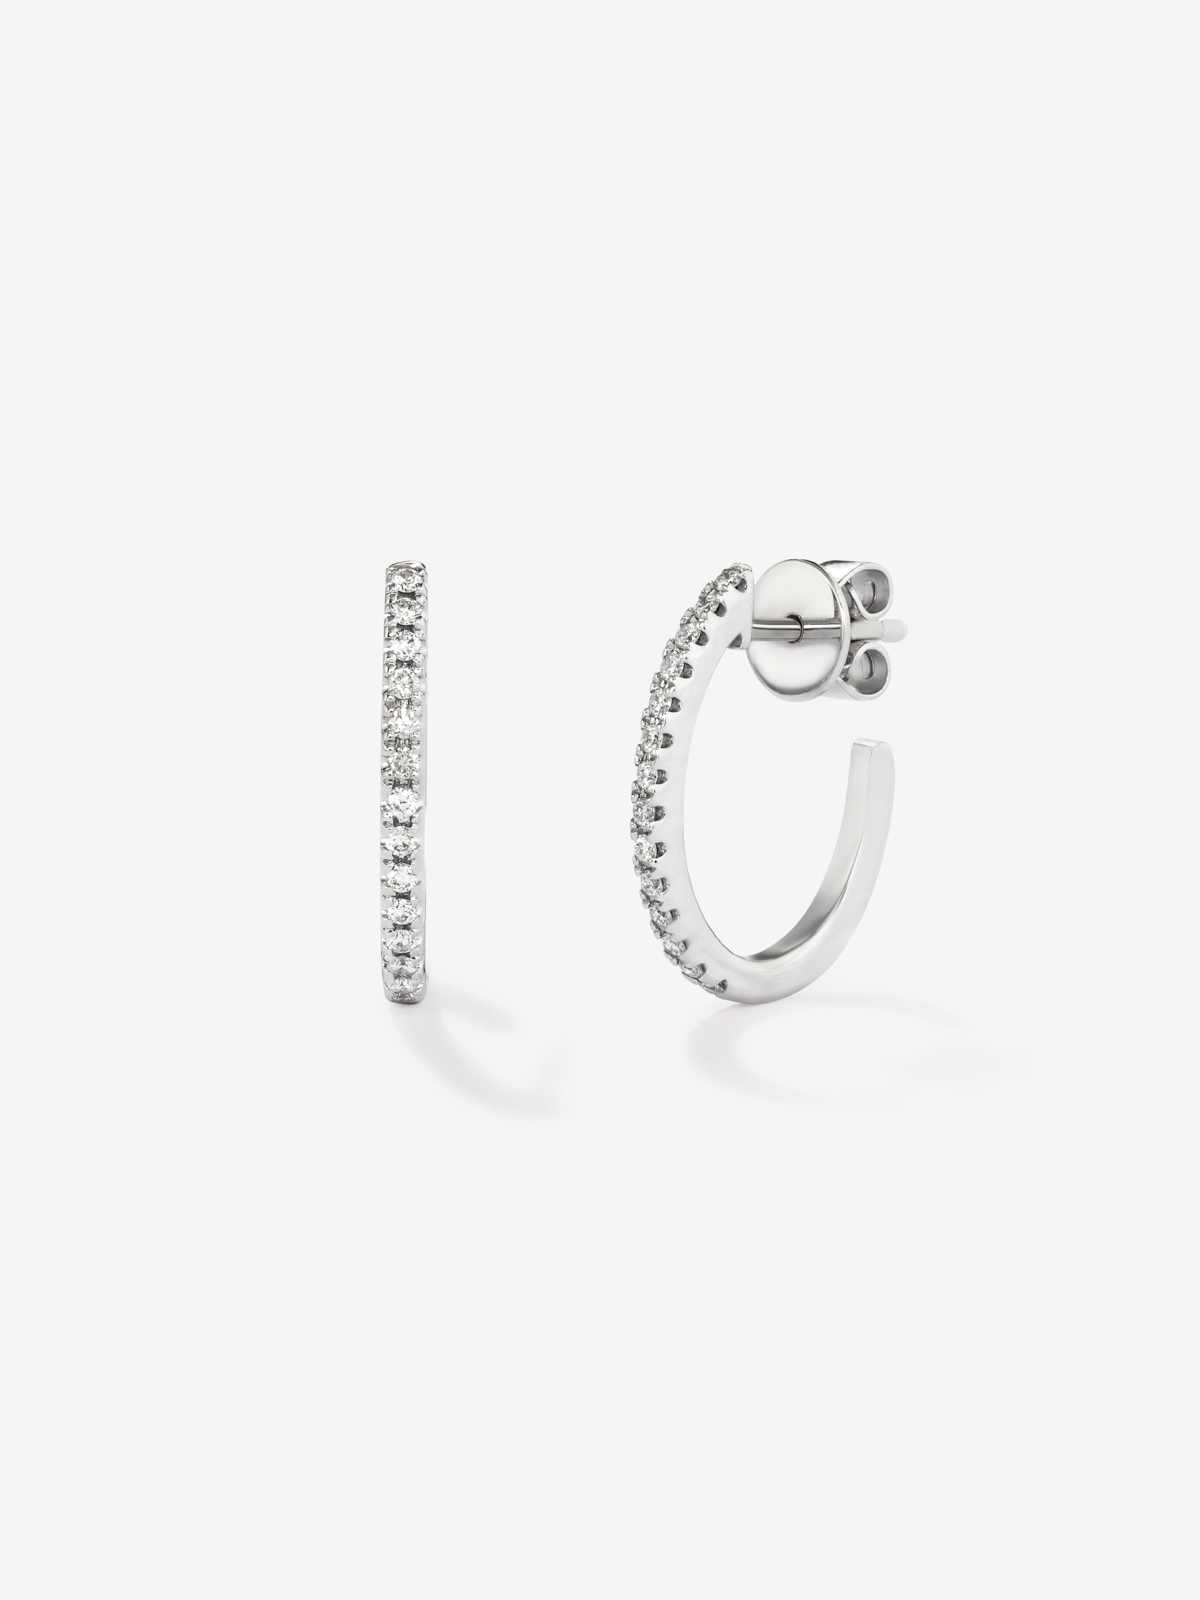 Thin hoop earrings made of 18K white gold with diamonds